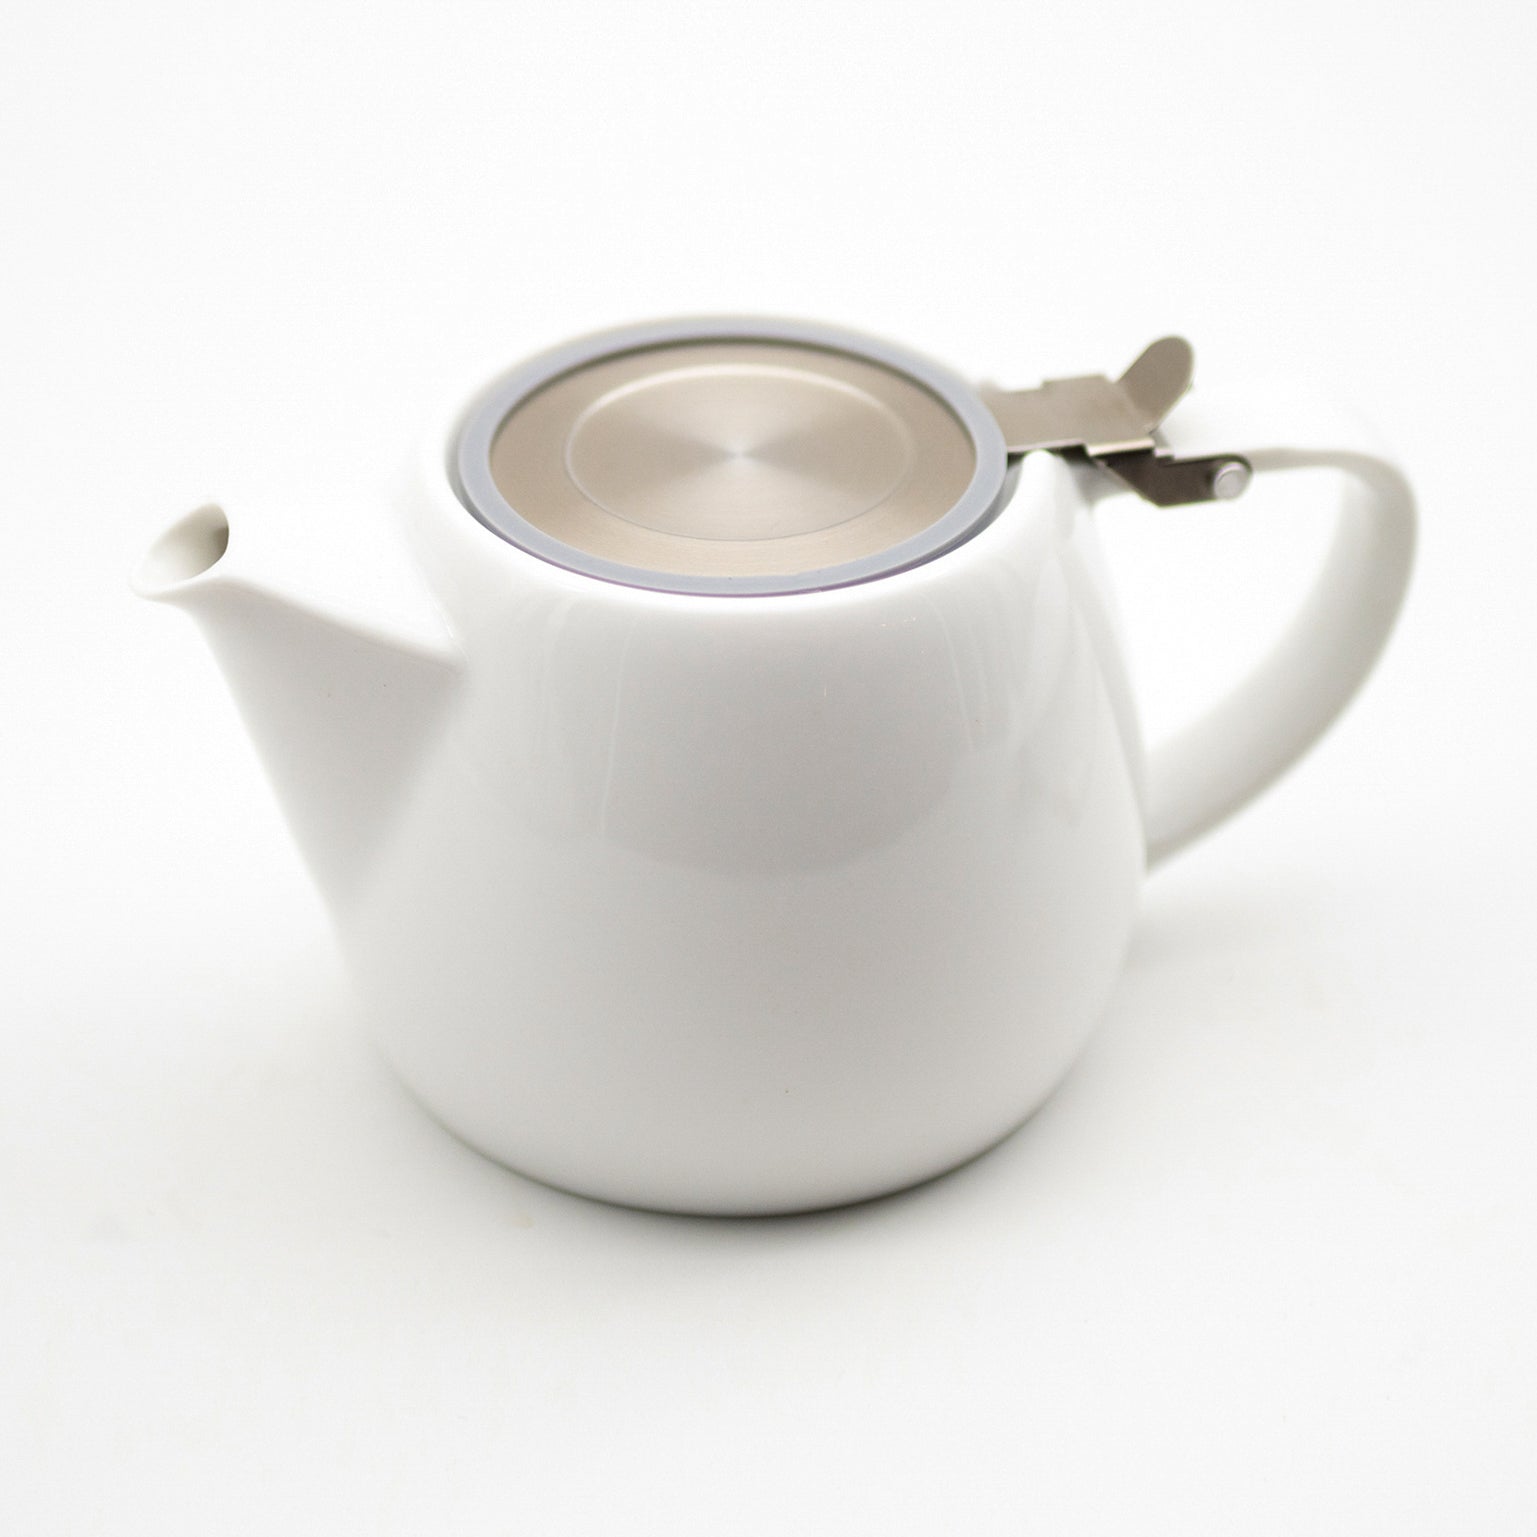 A close up of a white porcelain tea pot and stainless steel infuser. Shop the range of TEA23 tea accessories, gadgets, and TEA23 merchandise